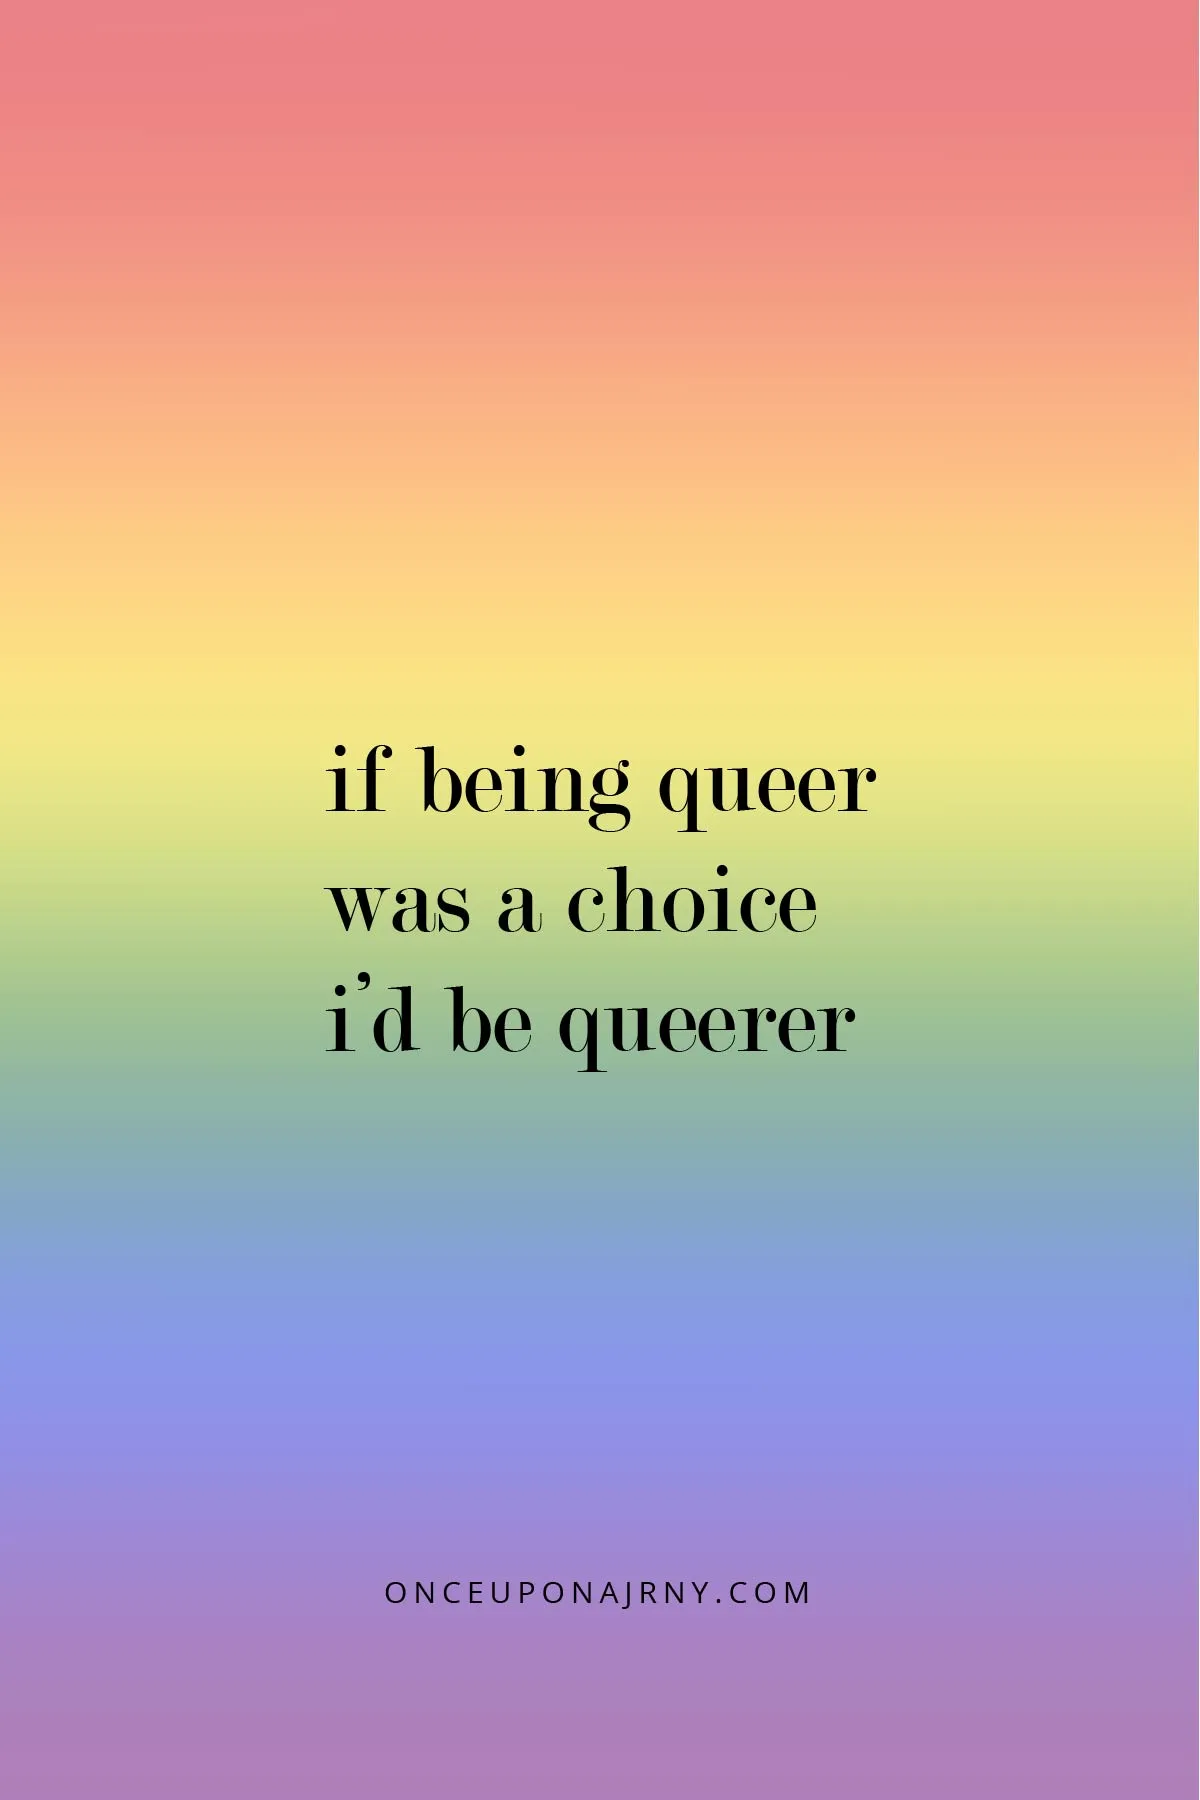 If being queer was a choice, I’d be queerer lgbtq quotes